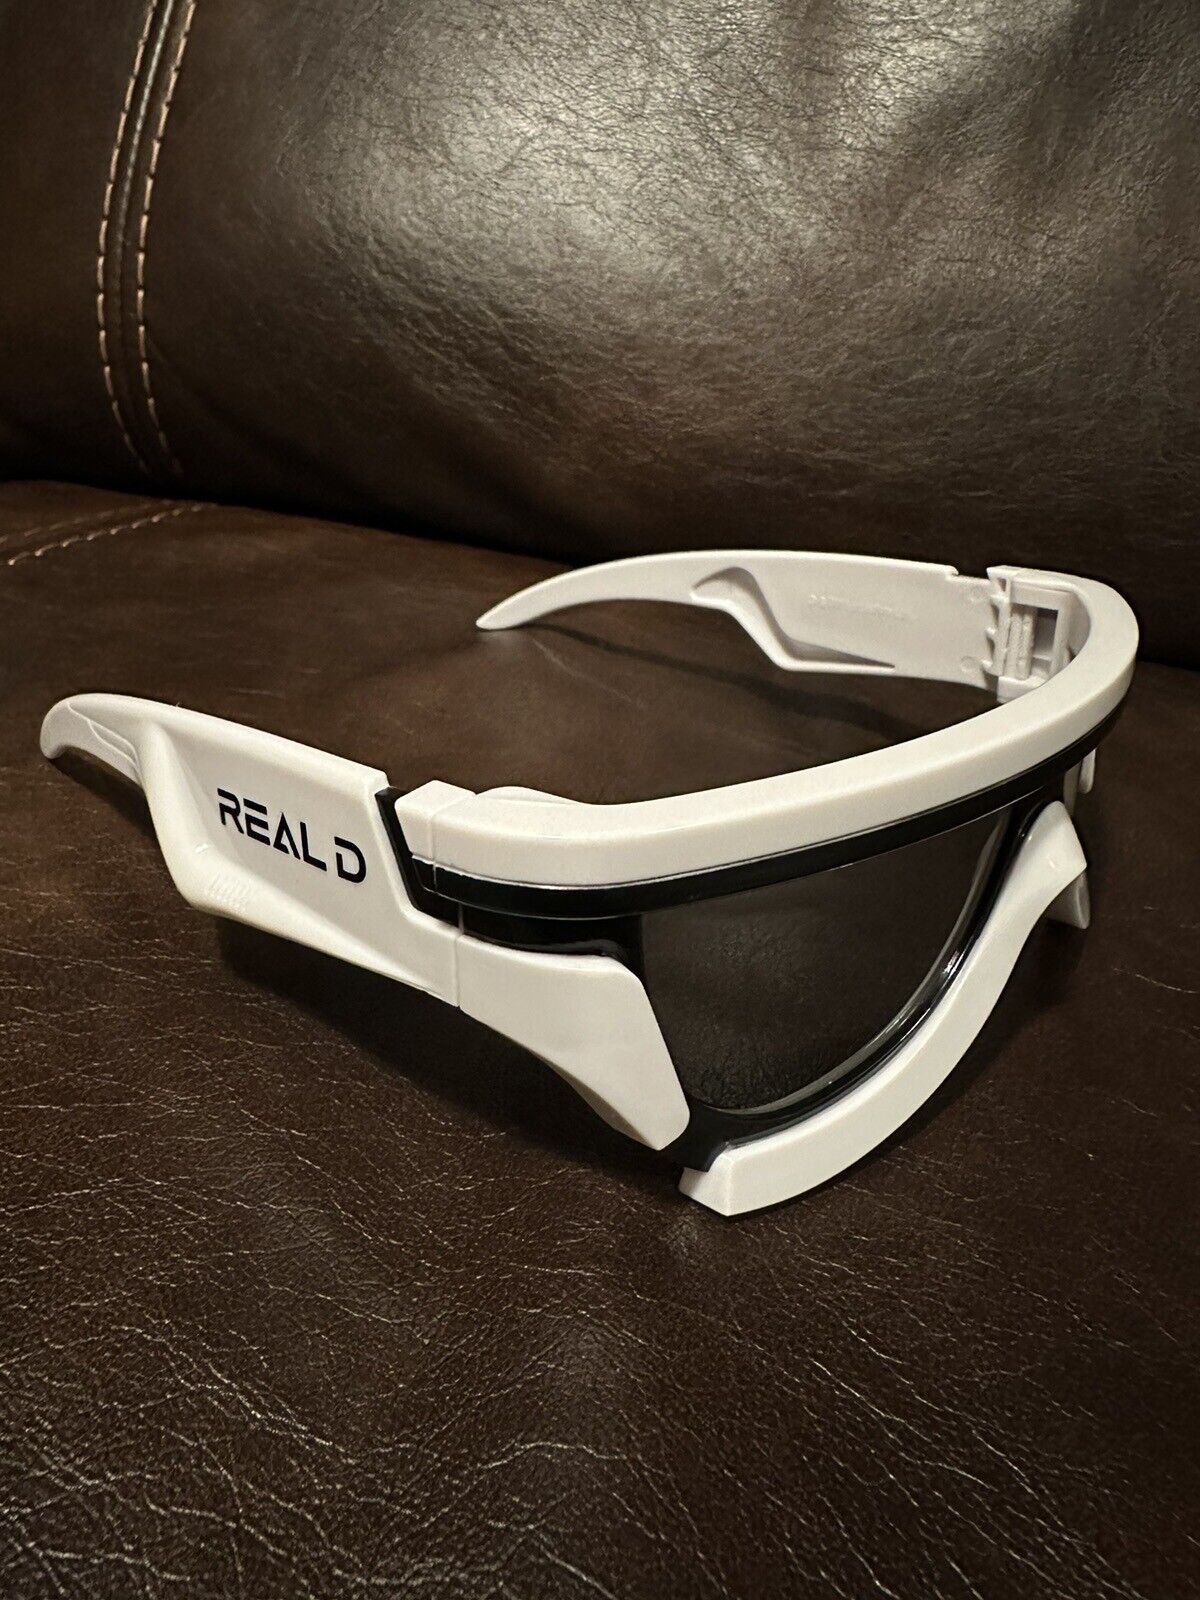 STAR WARS The Force Awakens Stormtrooper REAL D 3D Glasses Limited Edition